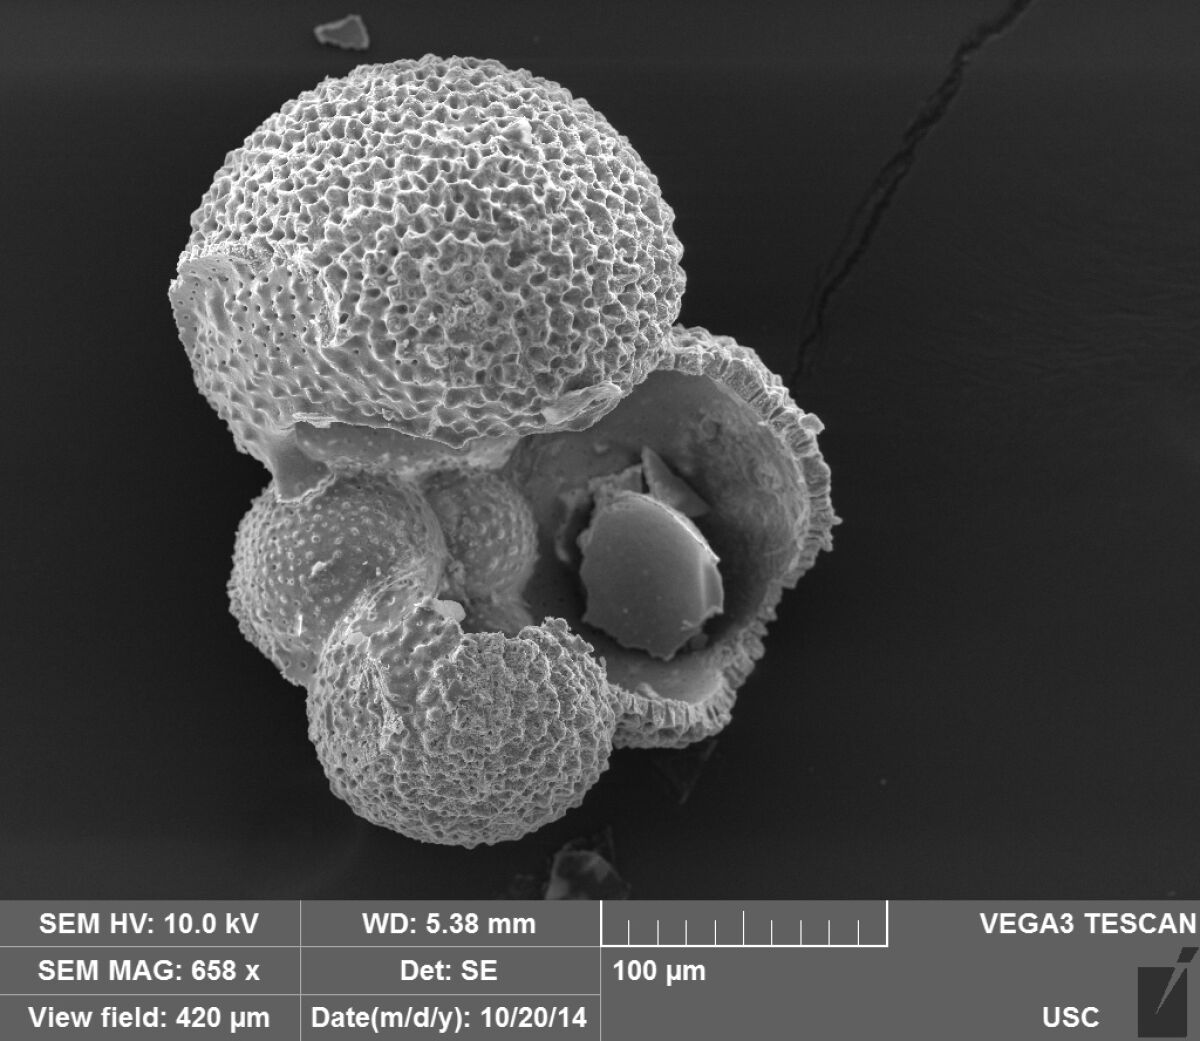 foraminifera magnified 650 times its size by Scanning Electron Microscope